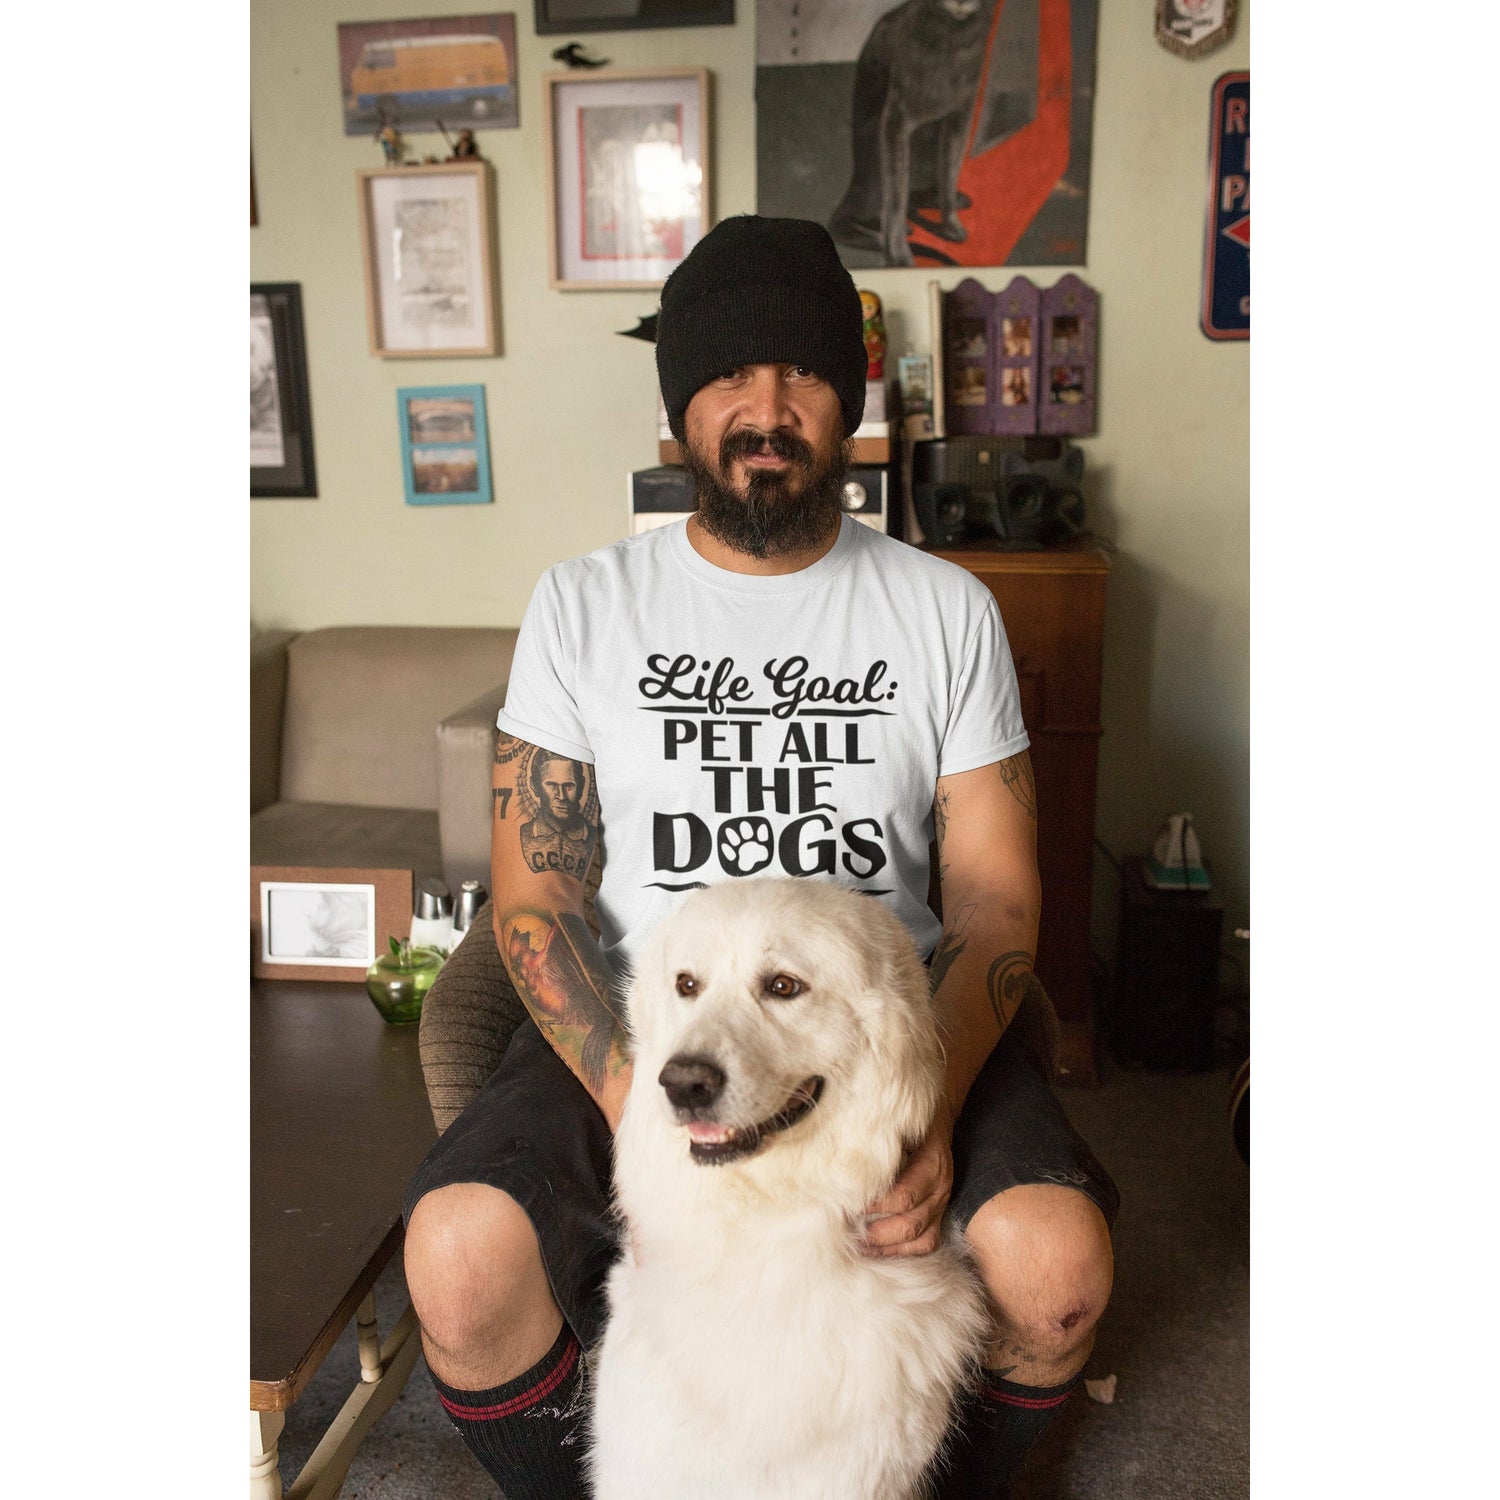 Man wearing a Tee shirt that says "Life Goal: Pet All The Dogs."